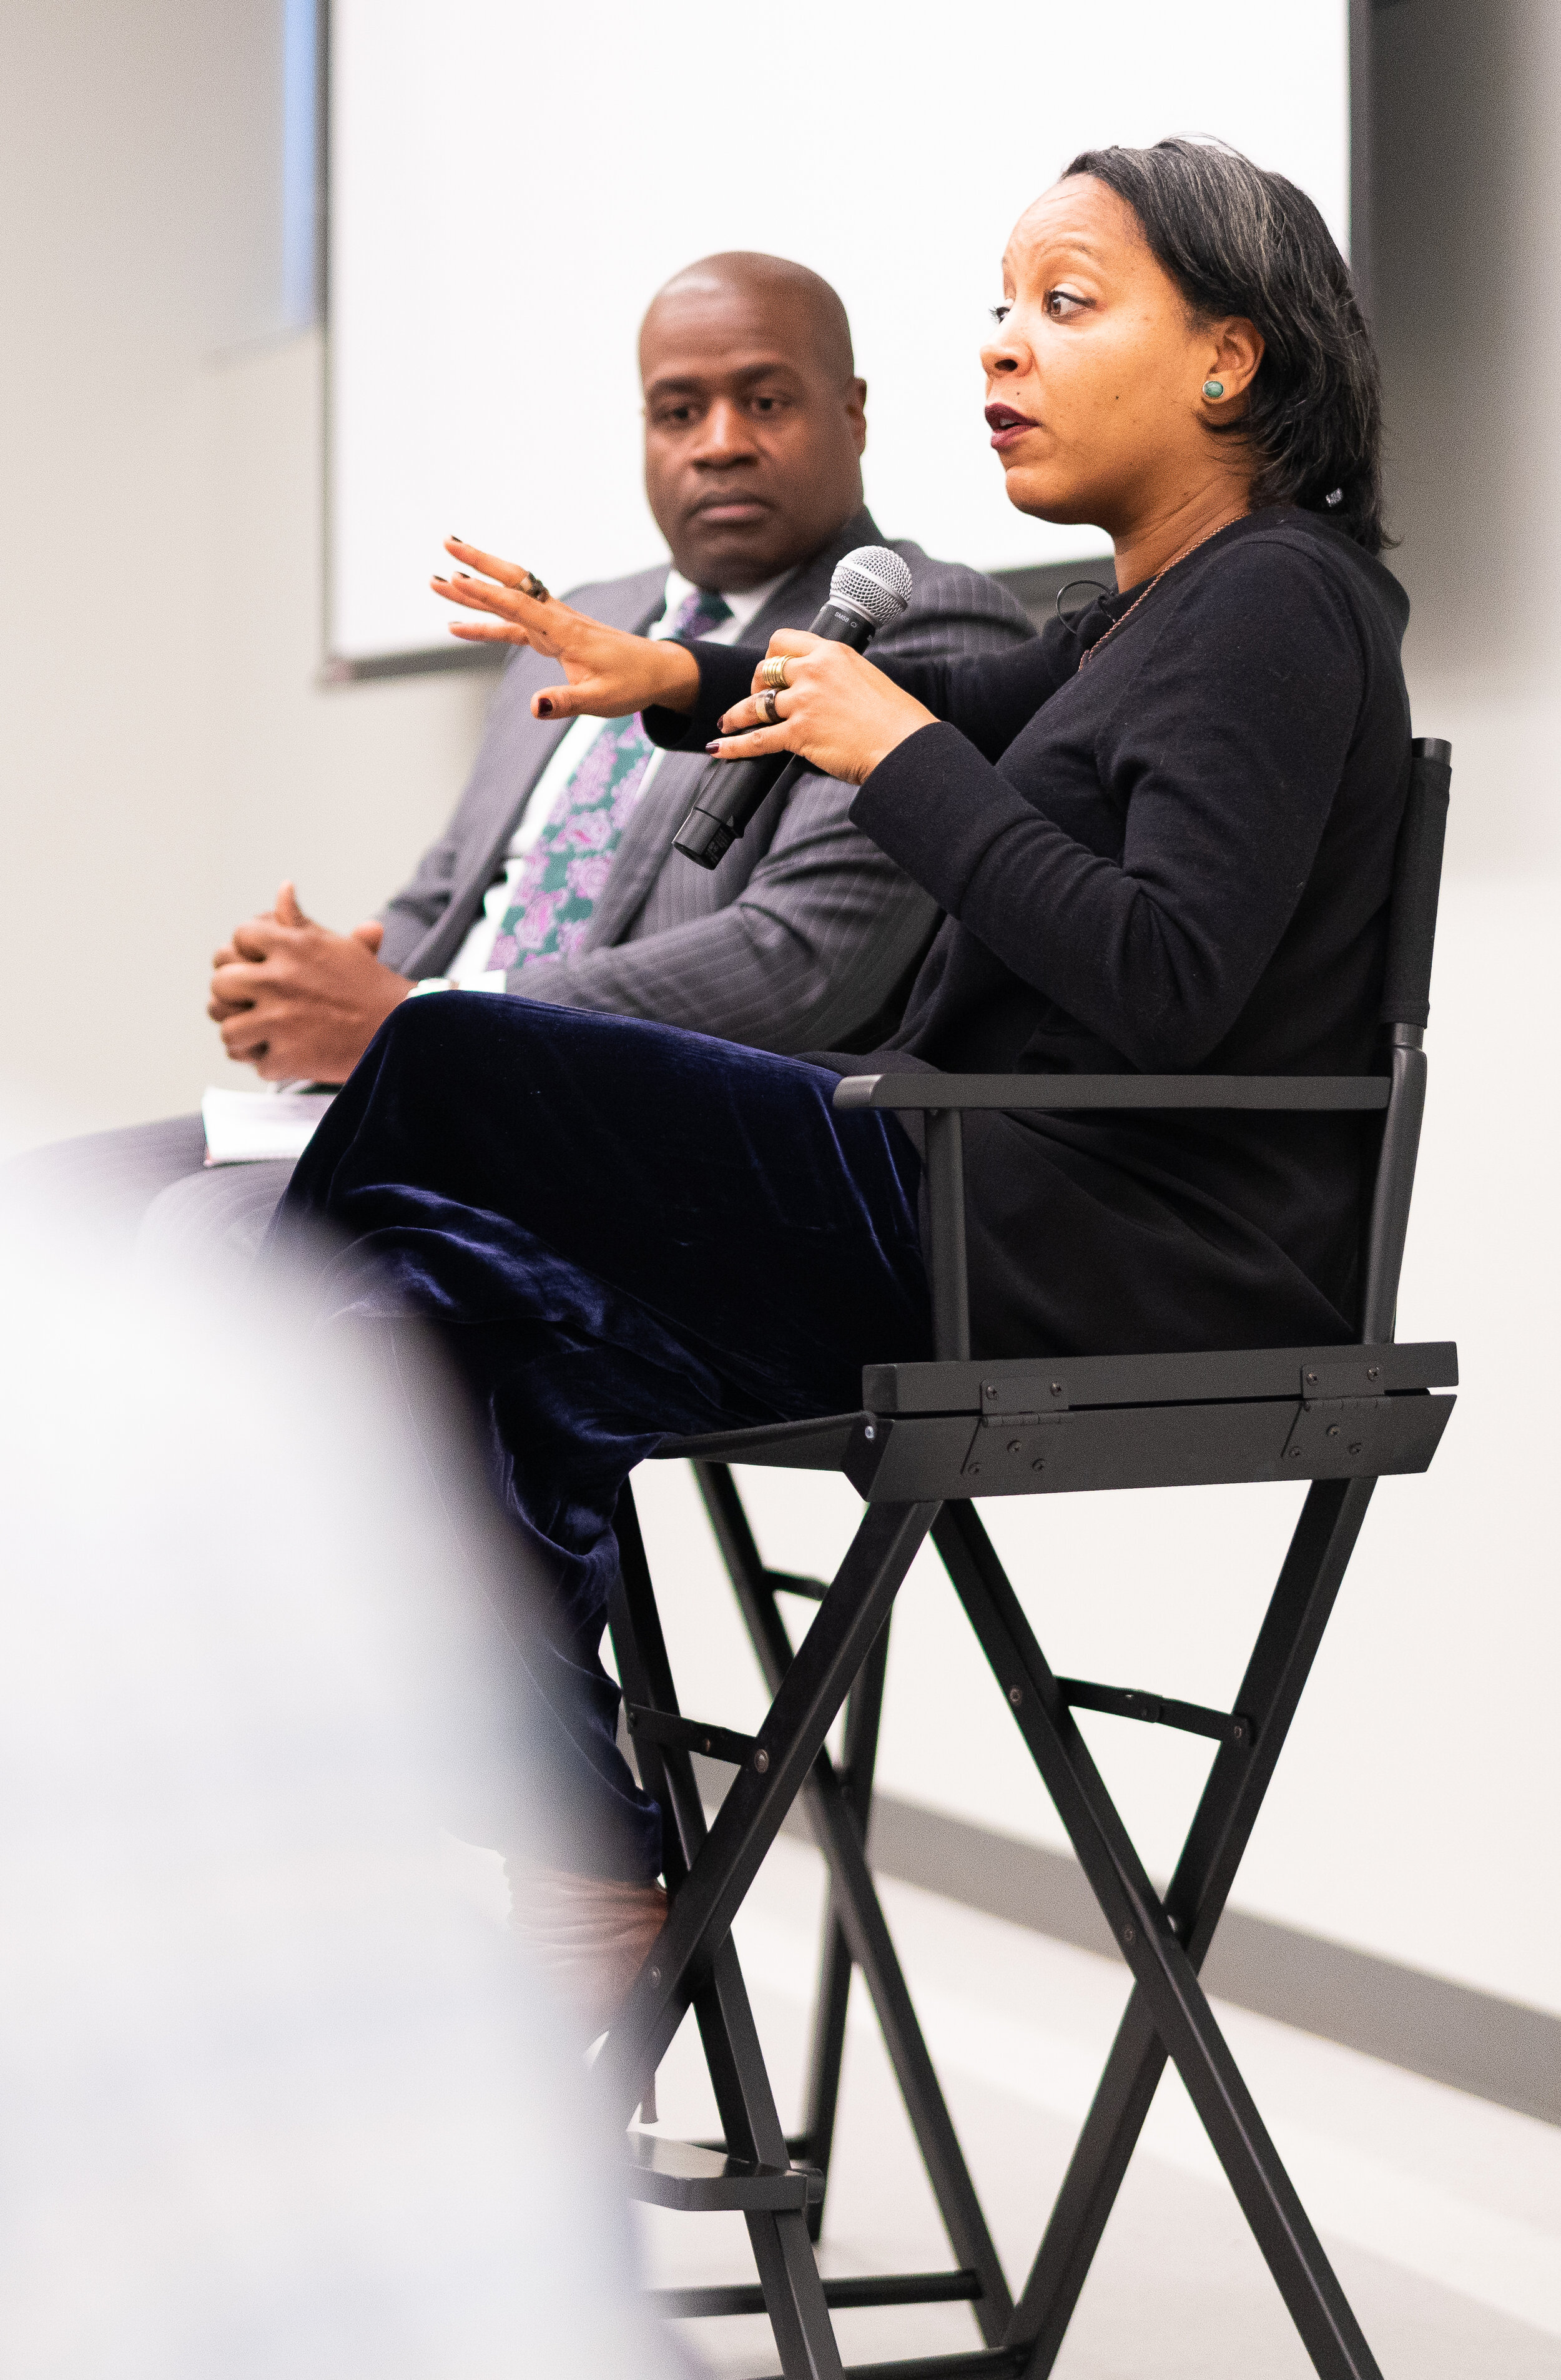   Christina Greer, Associate Professor of Political Science and American Studies at Fordham University in a Q&amp;A with SUNY Downstate Health Sciences University VP Keydron Guinn.  